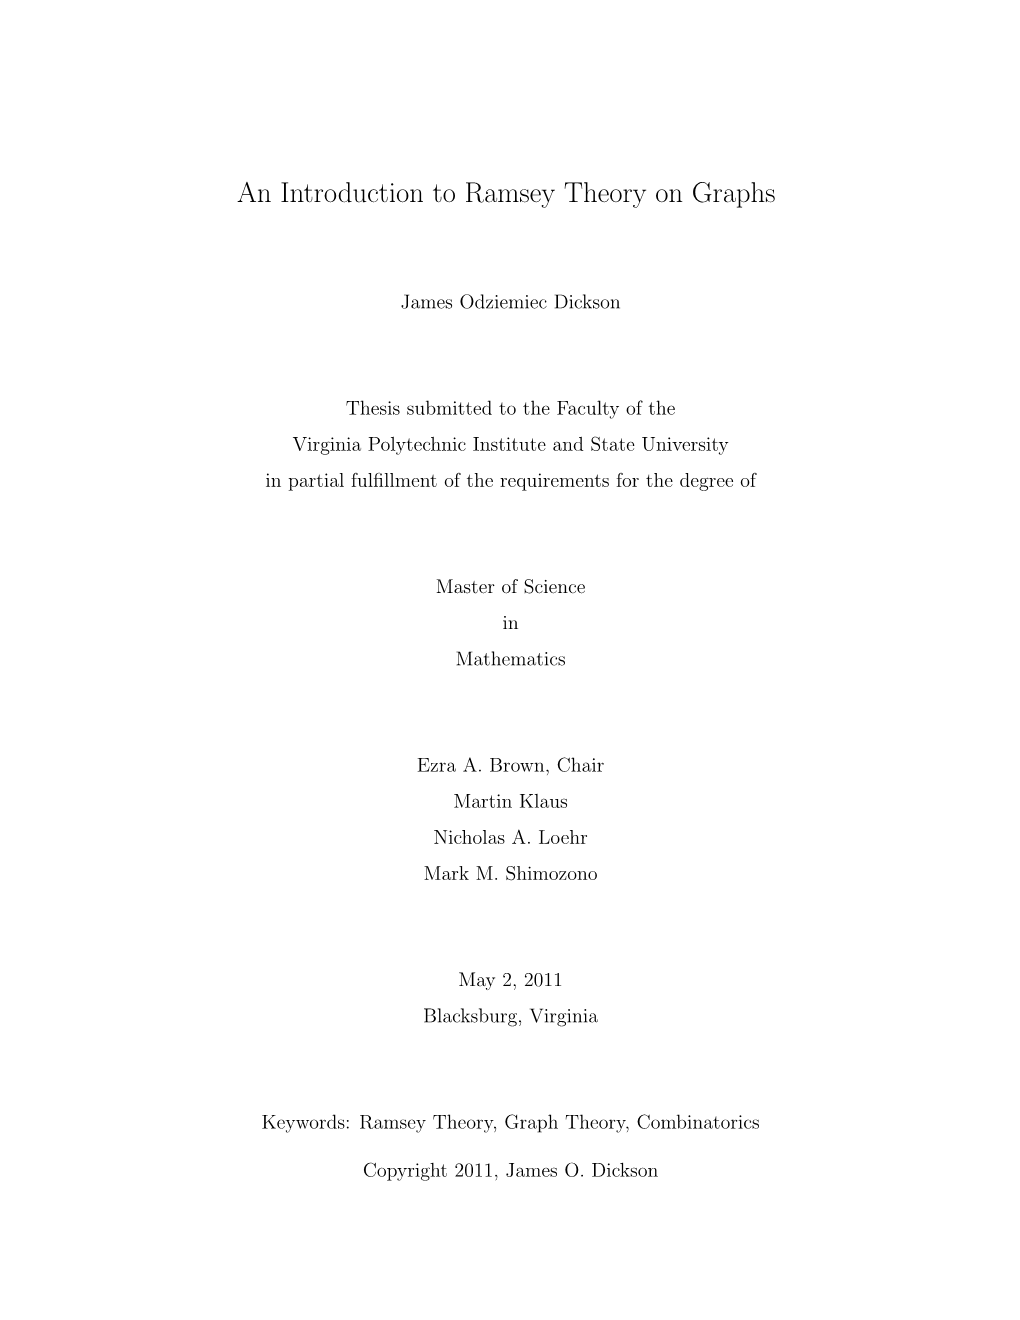 An Introduction to Ramsey Theory on Graphs